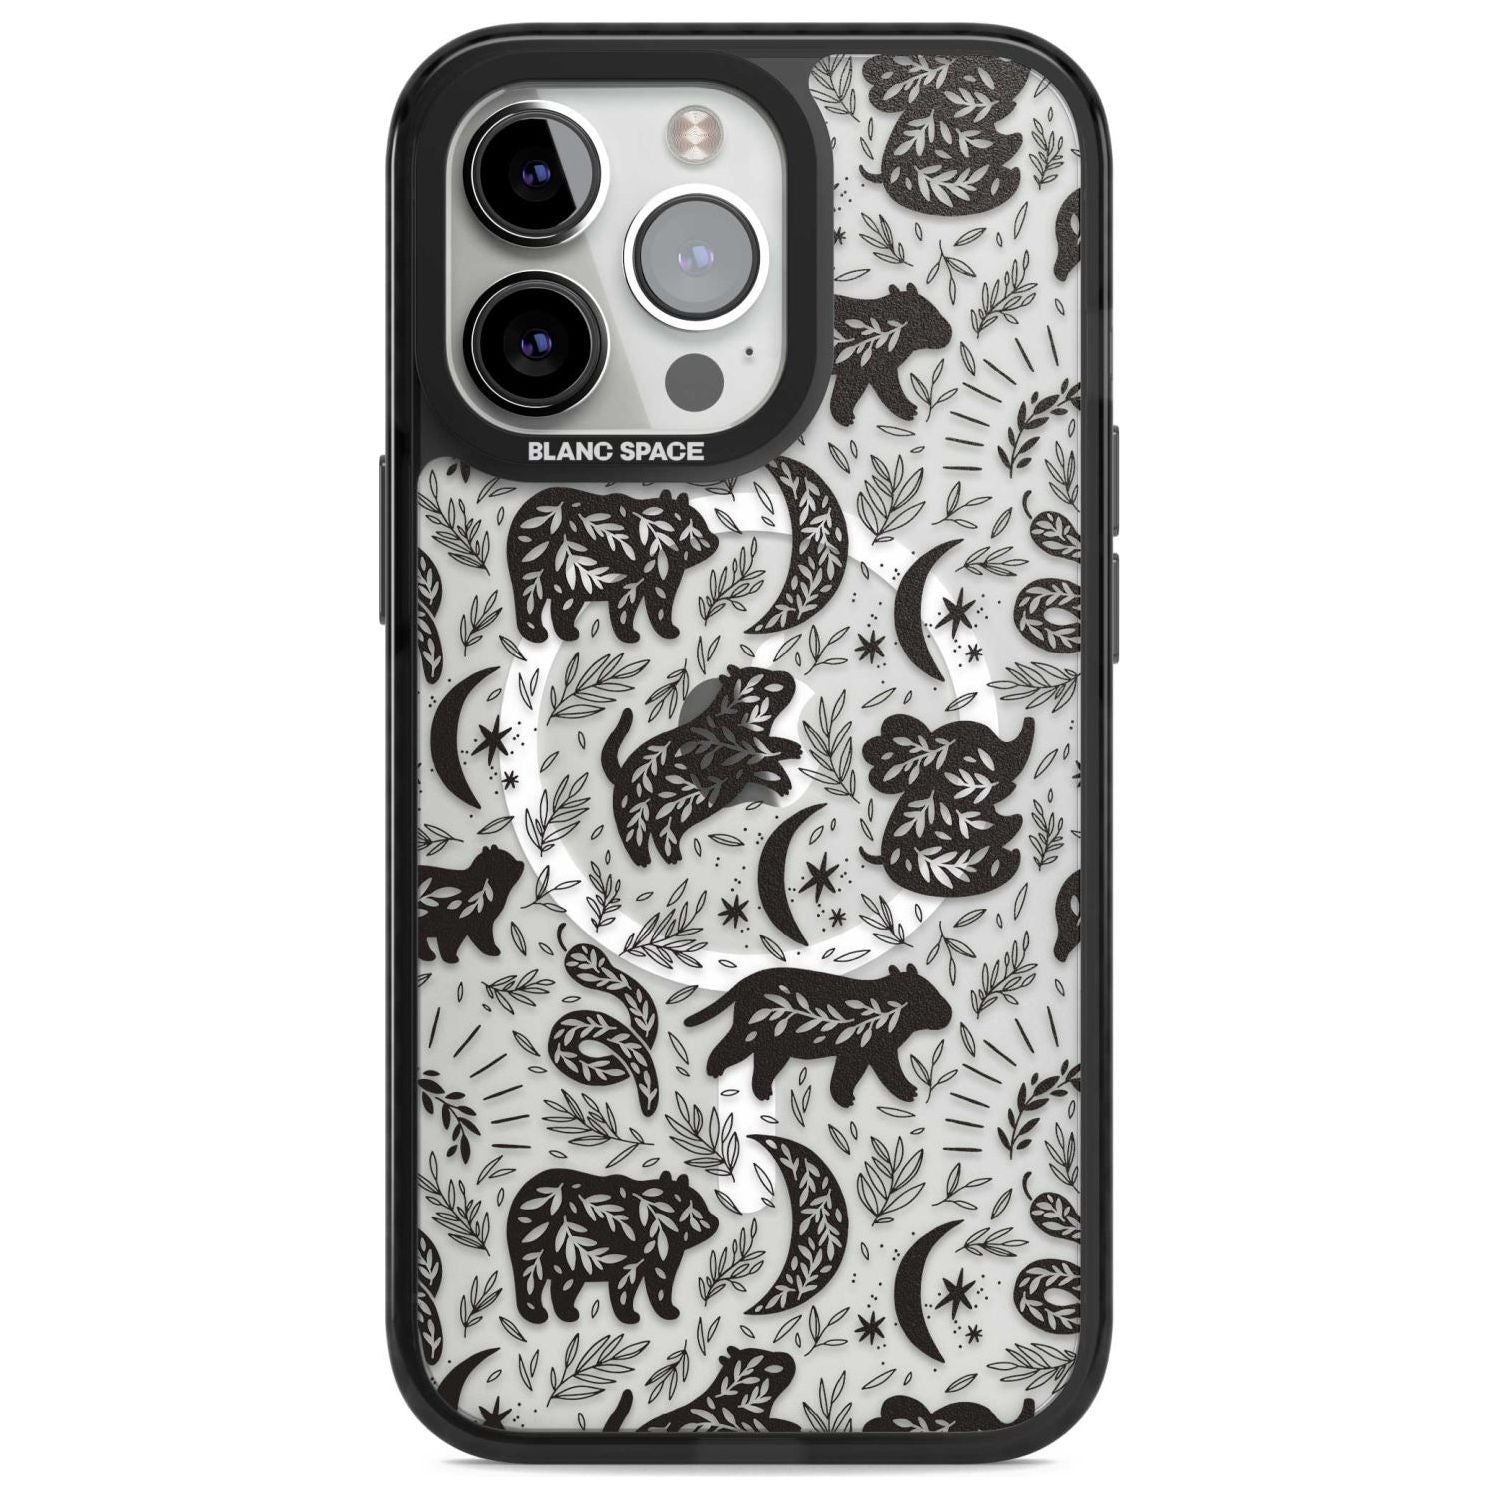 Leafy Bears Phone Case iPhone 15 Pro Max / Magsafe Black Impact Case,iPhone 15 Pro / Magsafe Black Impact Case,iPhone 14 Pro Max / Magsafe Black Impact Case,iPhone 14 Pro / Magsafe Black Impact Case,iPhone 13 Pro / Magsafe Black Impact Case Blanc Space